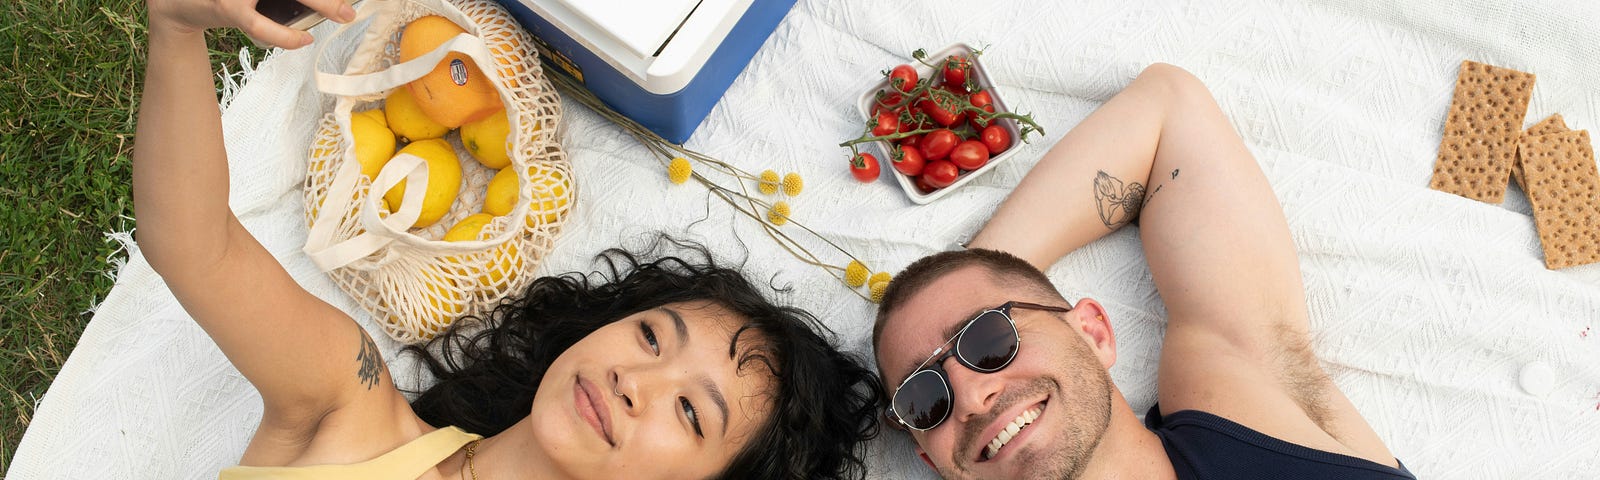 A young couple seem to be njoying taking a selfie laying on a p;icnic blanket with food.